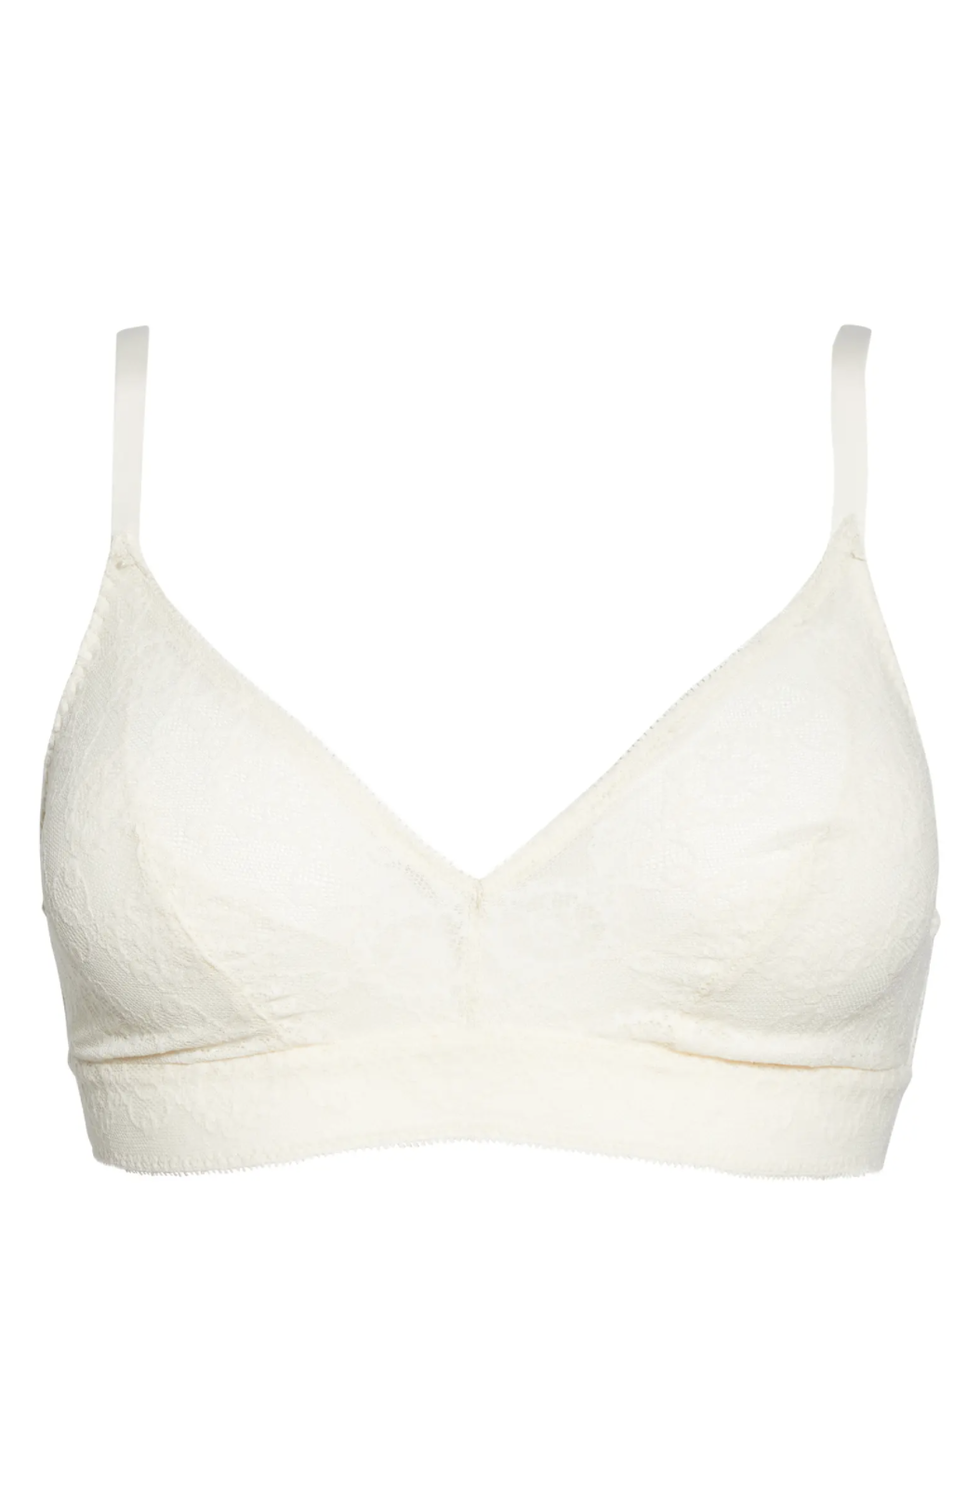 Etam French Lingerie Is Finally Available in the United States